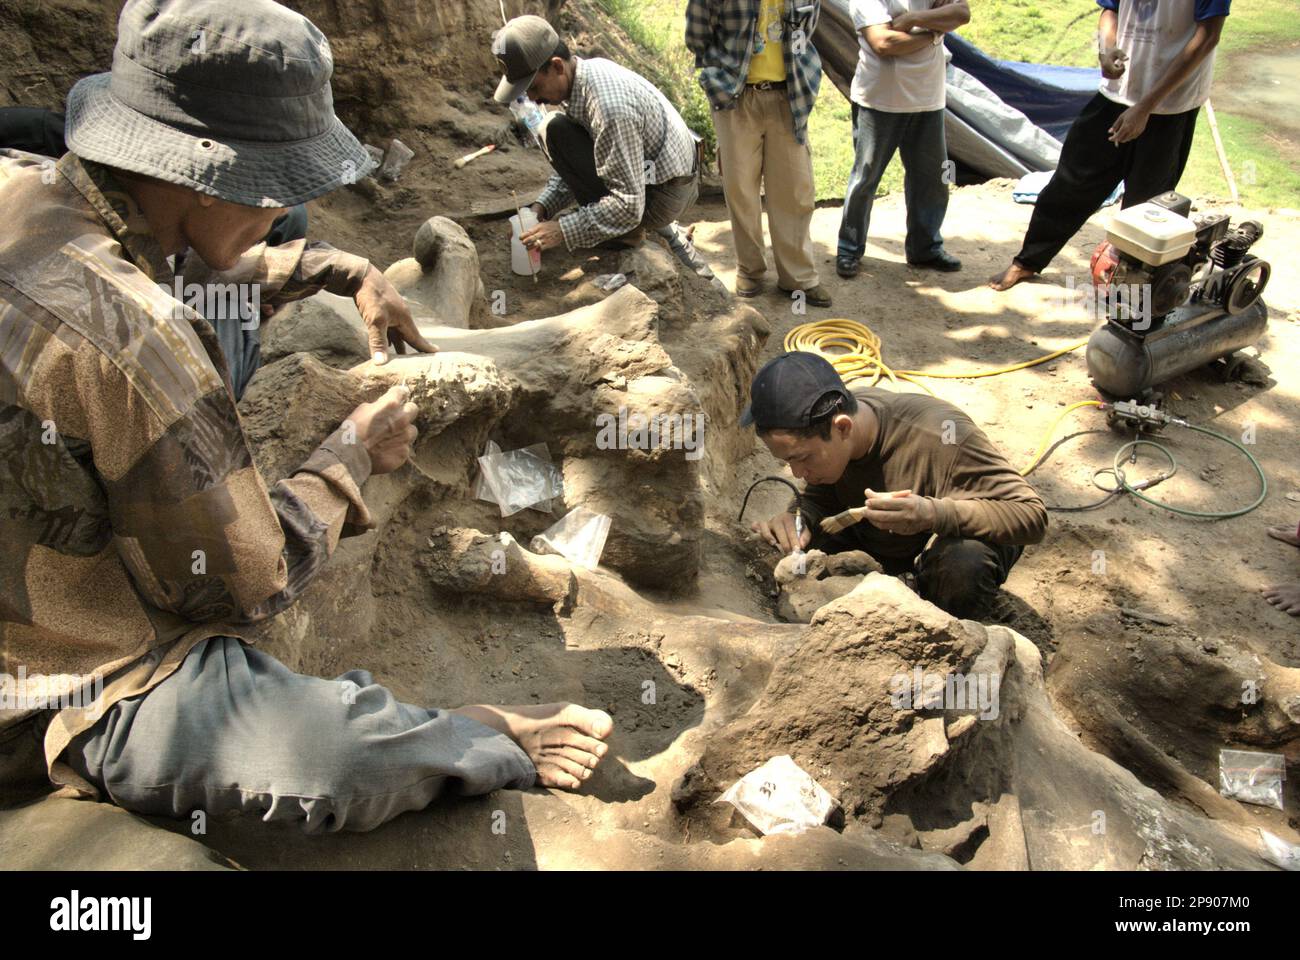 Paleontologists and villagers are working during the excavation of fossils of an extinct elephant species scientifically identified as Elephas hysudrindicus, or popularly called 'Blora elephant', in Sunggun, Mendalem, Kradenan, Blora, Central Java, Indonesia. During the excavation, a team of scientists from Vertebrate Research (Geological Agency, Indonesian Ministry of Energy and Mineral Resources) led by paleontologists Iwan Kurniawan and Fachroel Aziz discovered the species' bones almost entirely (around 90 percent) that later would allow them to build a scientific reconstruction, which is.. Stock Photo